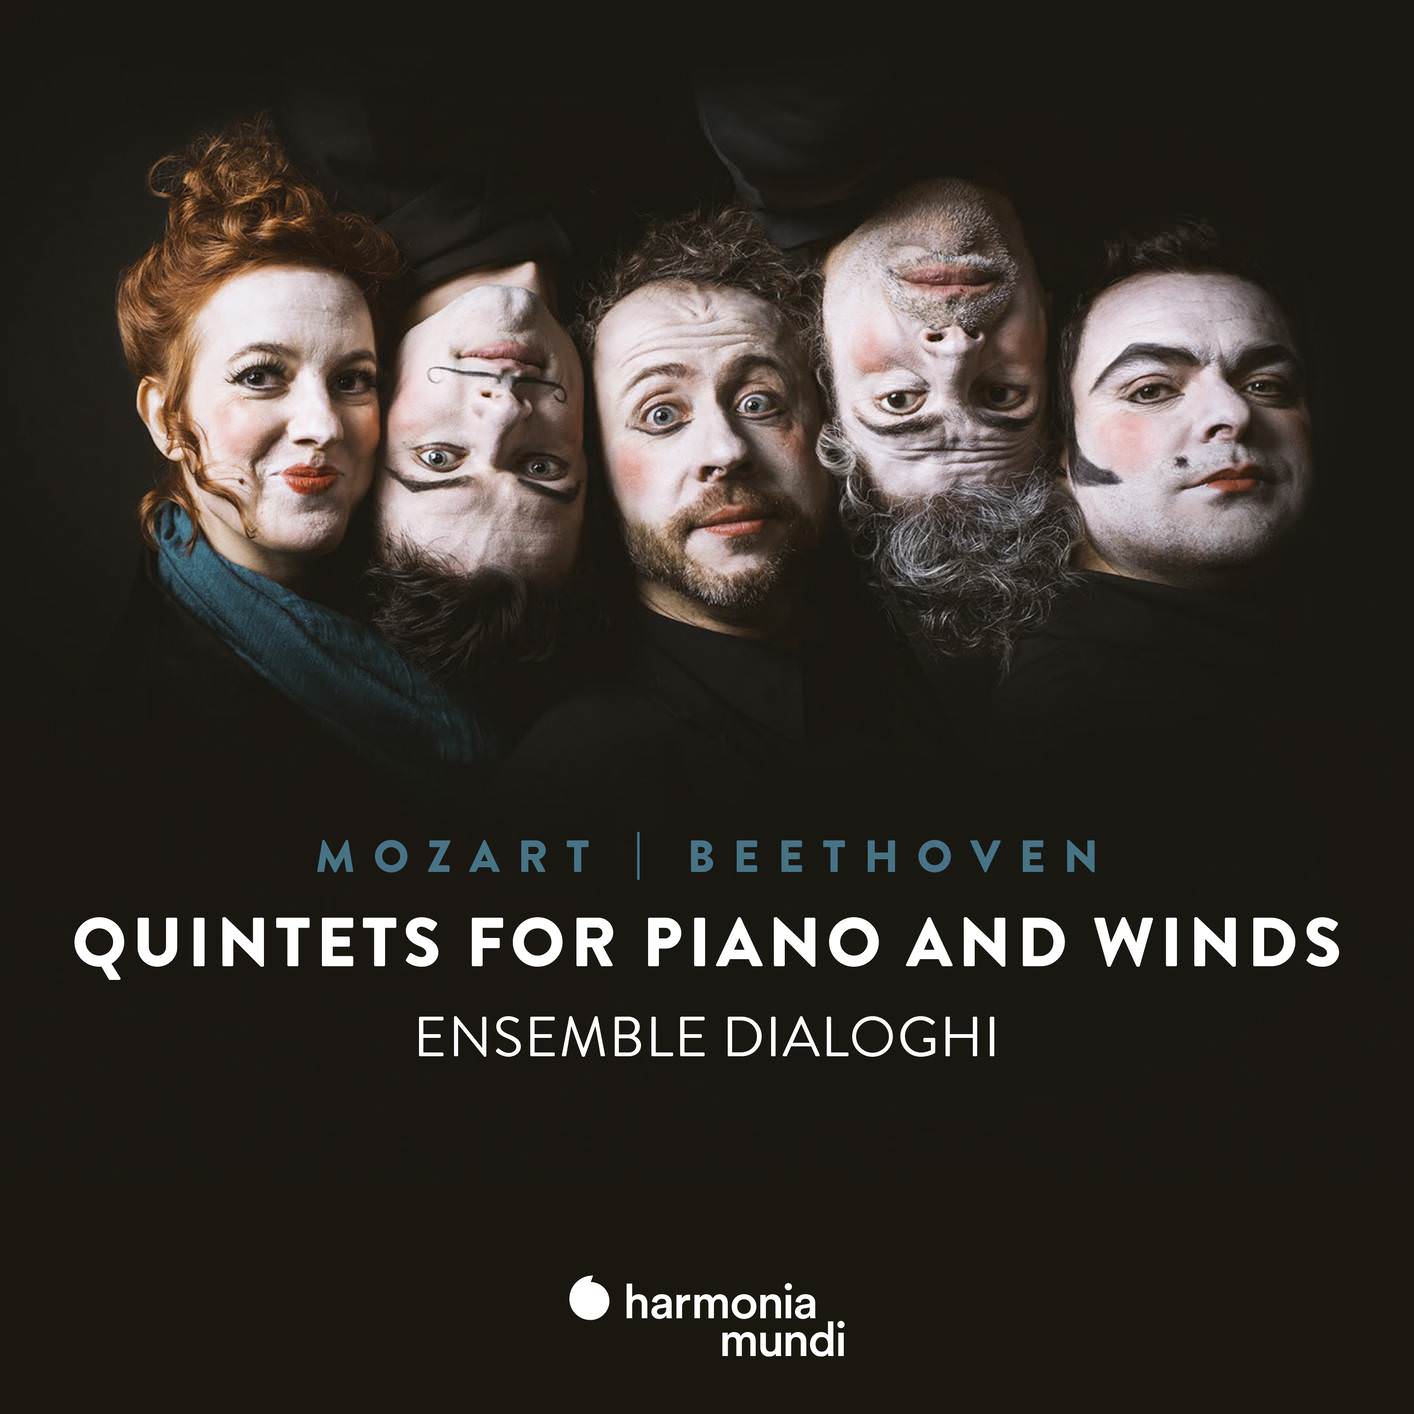 Ensemble Dialoghi – Mozart & Beethoven: Quintets for piano and winds (2018) [FLAC 24bit/96kHz]